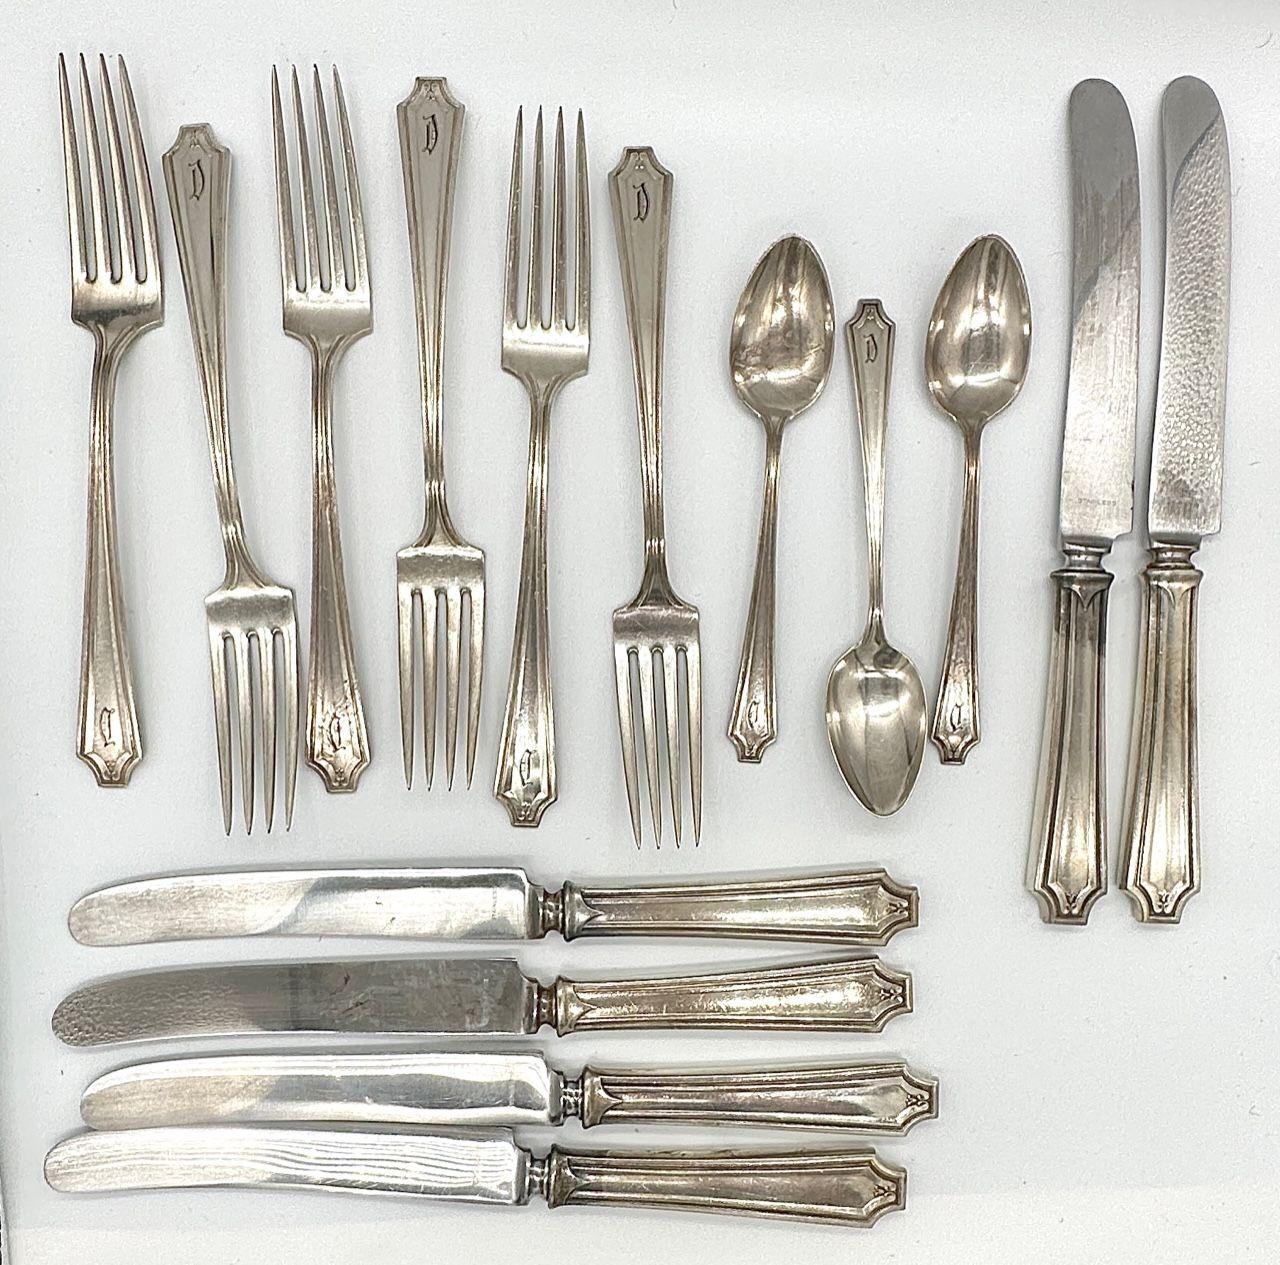 Old French King Albert Sterling Silverware Set of 15 by Whiting Manf Co In Excellent Condition For Sale In Van Nuys, CA